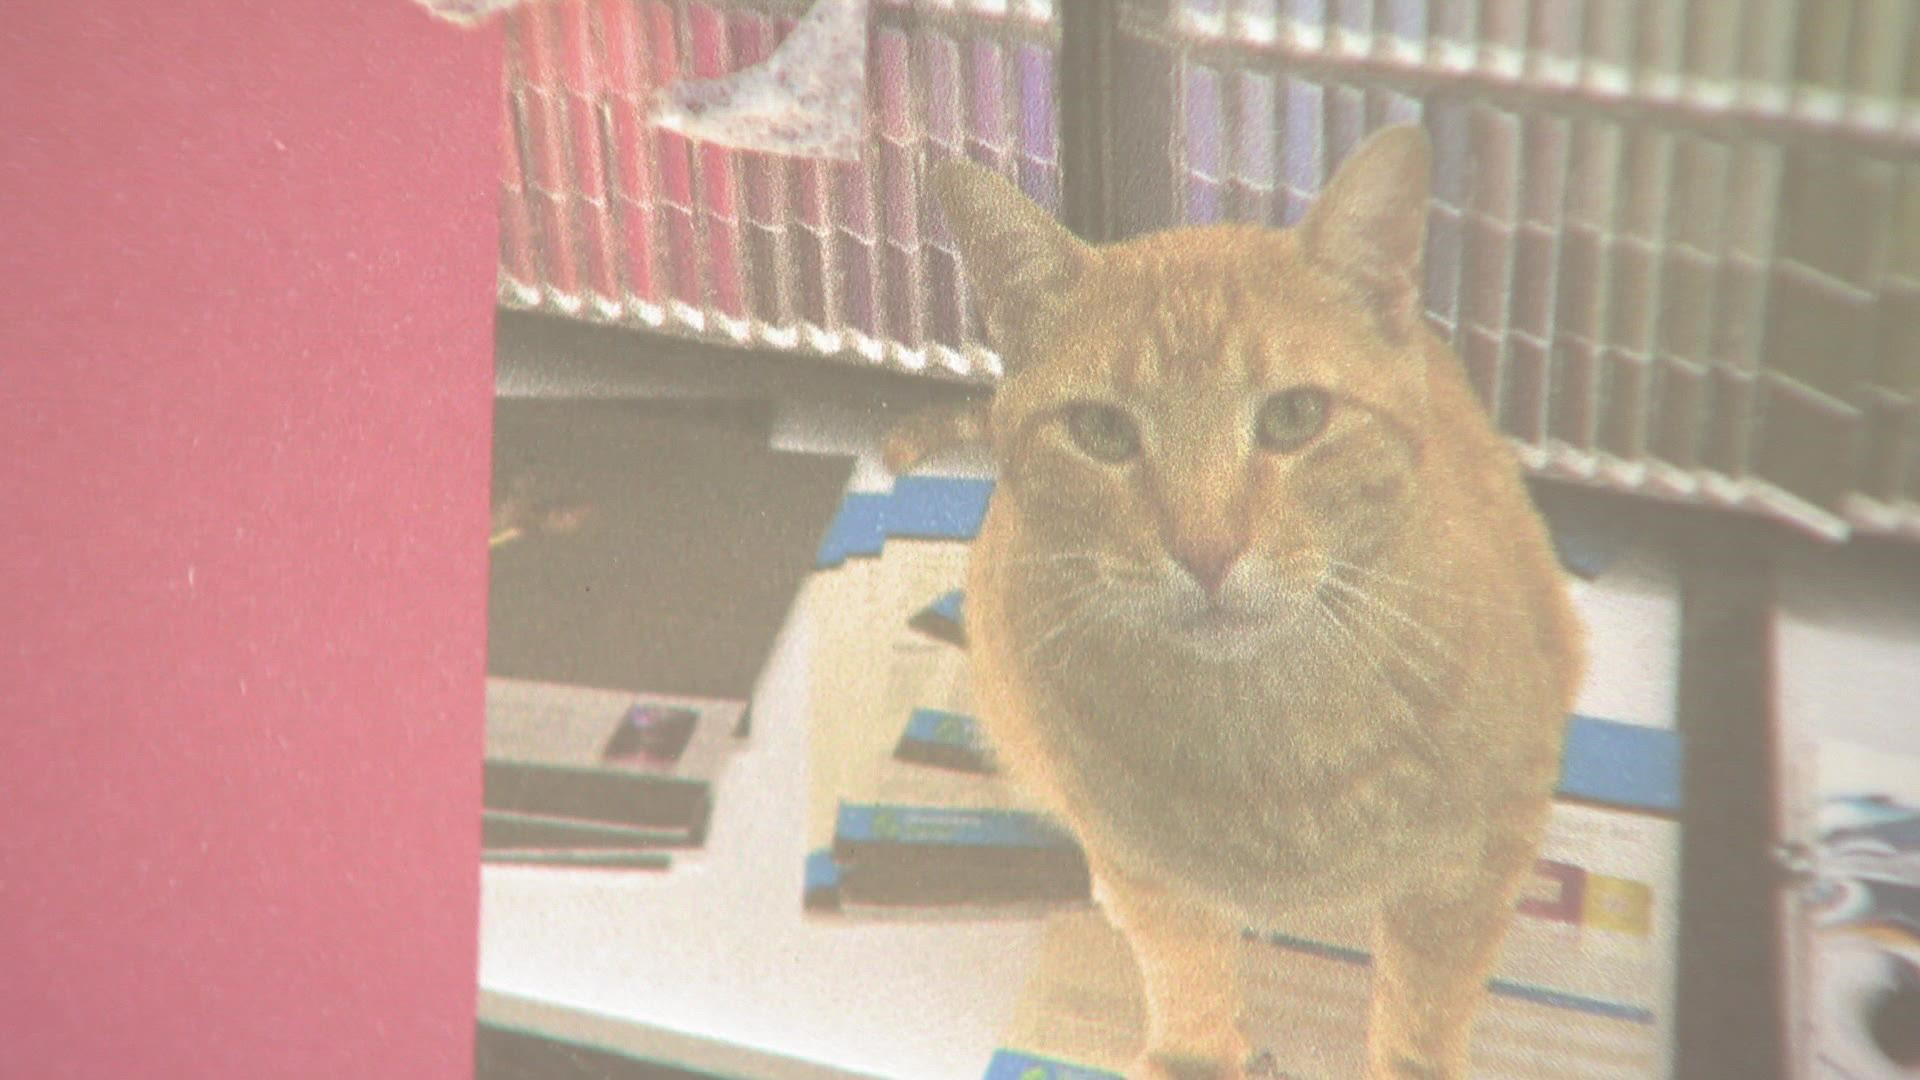 Last week, Morris the cat wandered out of the store to the parking lot next door when security cameras caught 2 people picking up Morris and driving away.